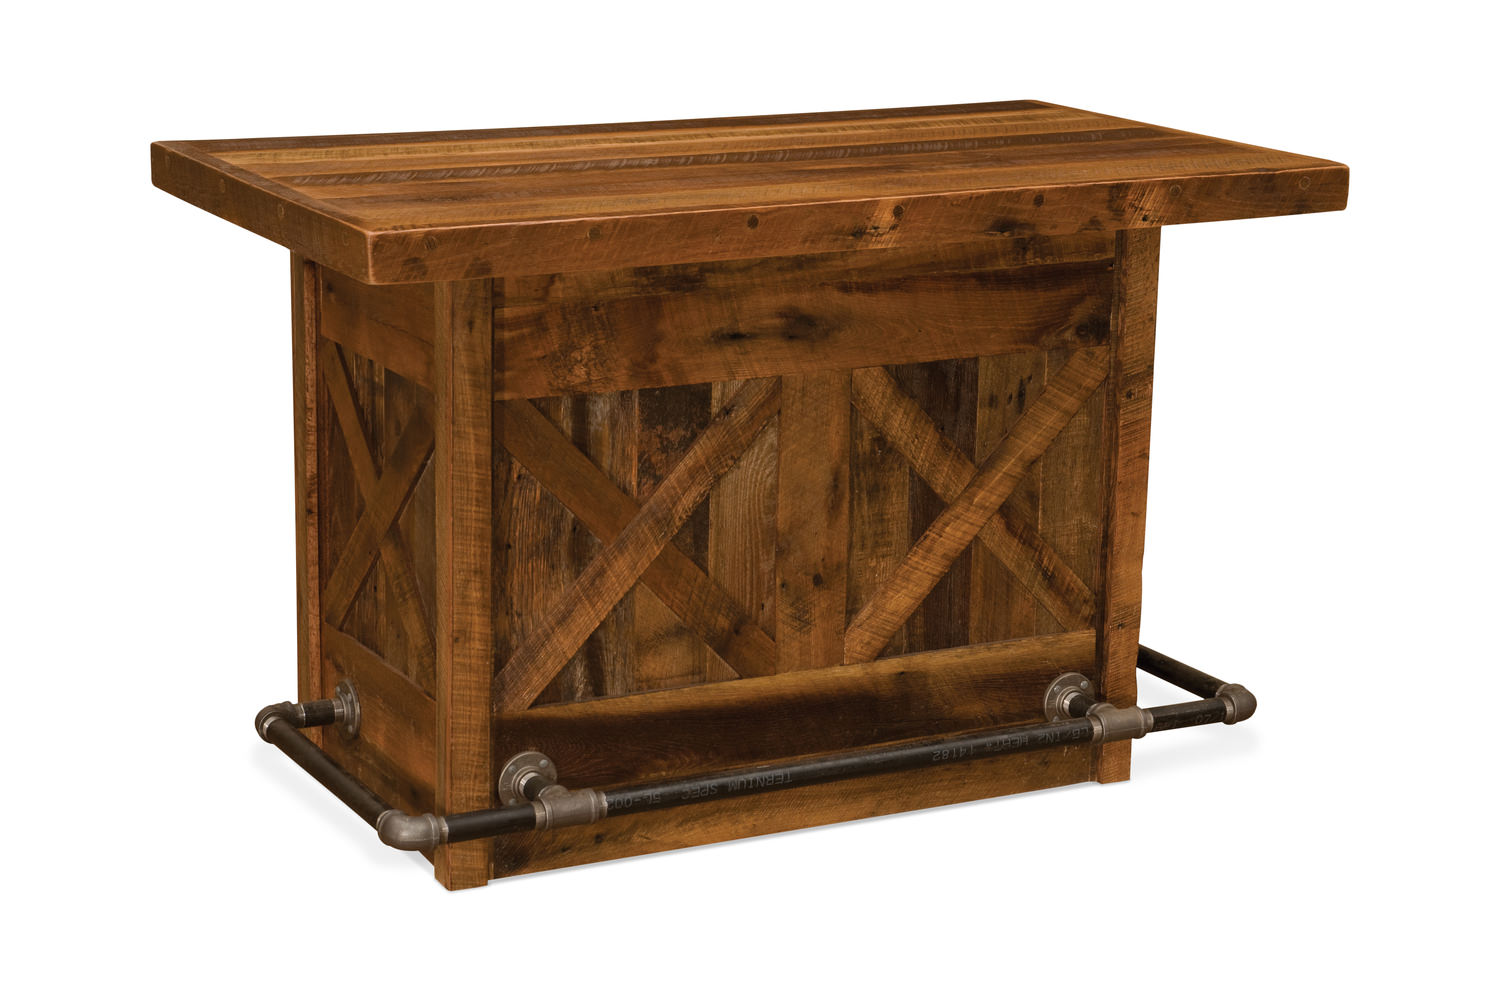 barnwood bar with artisan top hom furniture accent table pier lamps uttermost henzler end leick mission luxury tablecloths inch tall nightstands contemporary dining room lucite